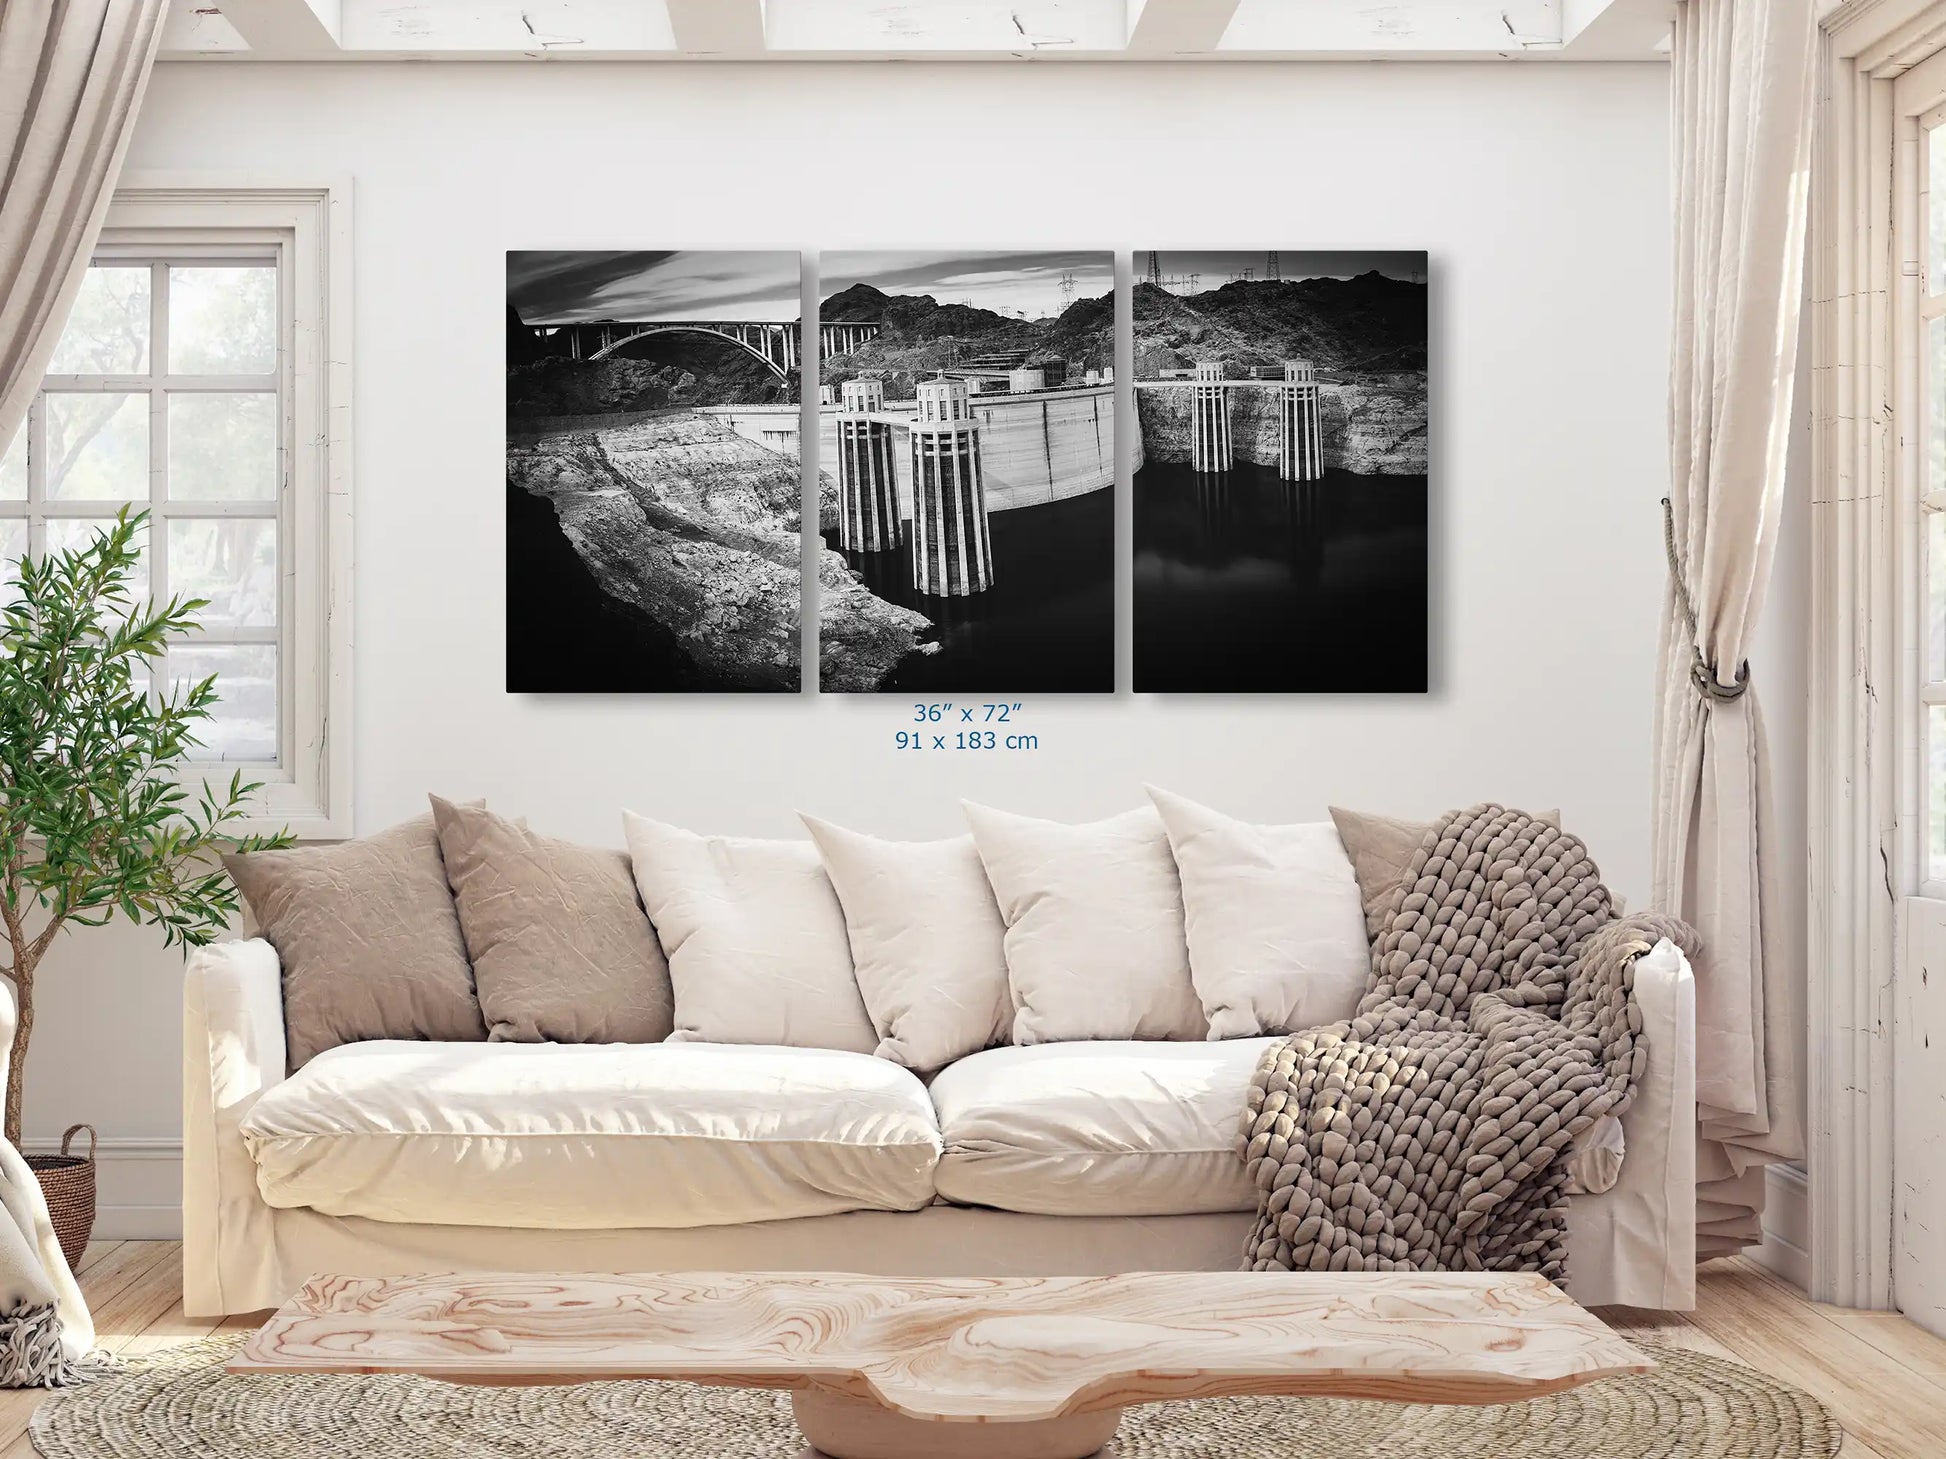 A black and white triptych canvas print of Hoover Dam, spanning 36x72 inches, dominates a living room wall with its impressive scale.